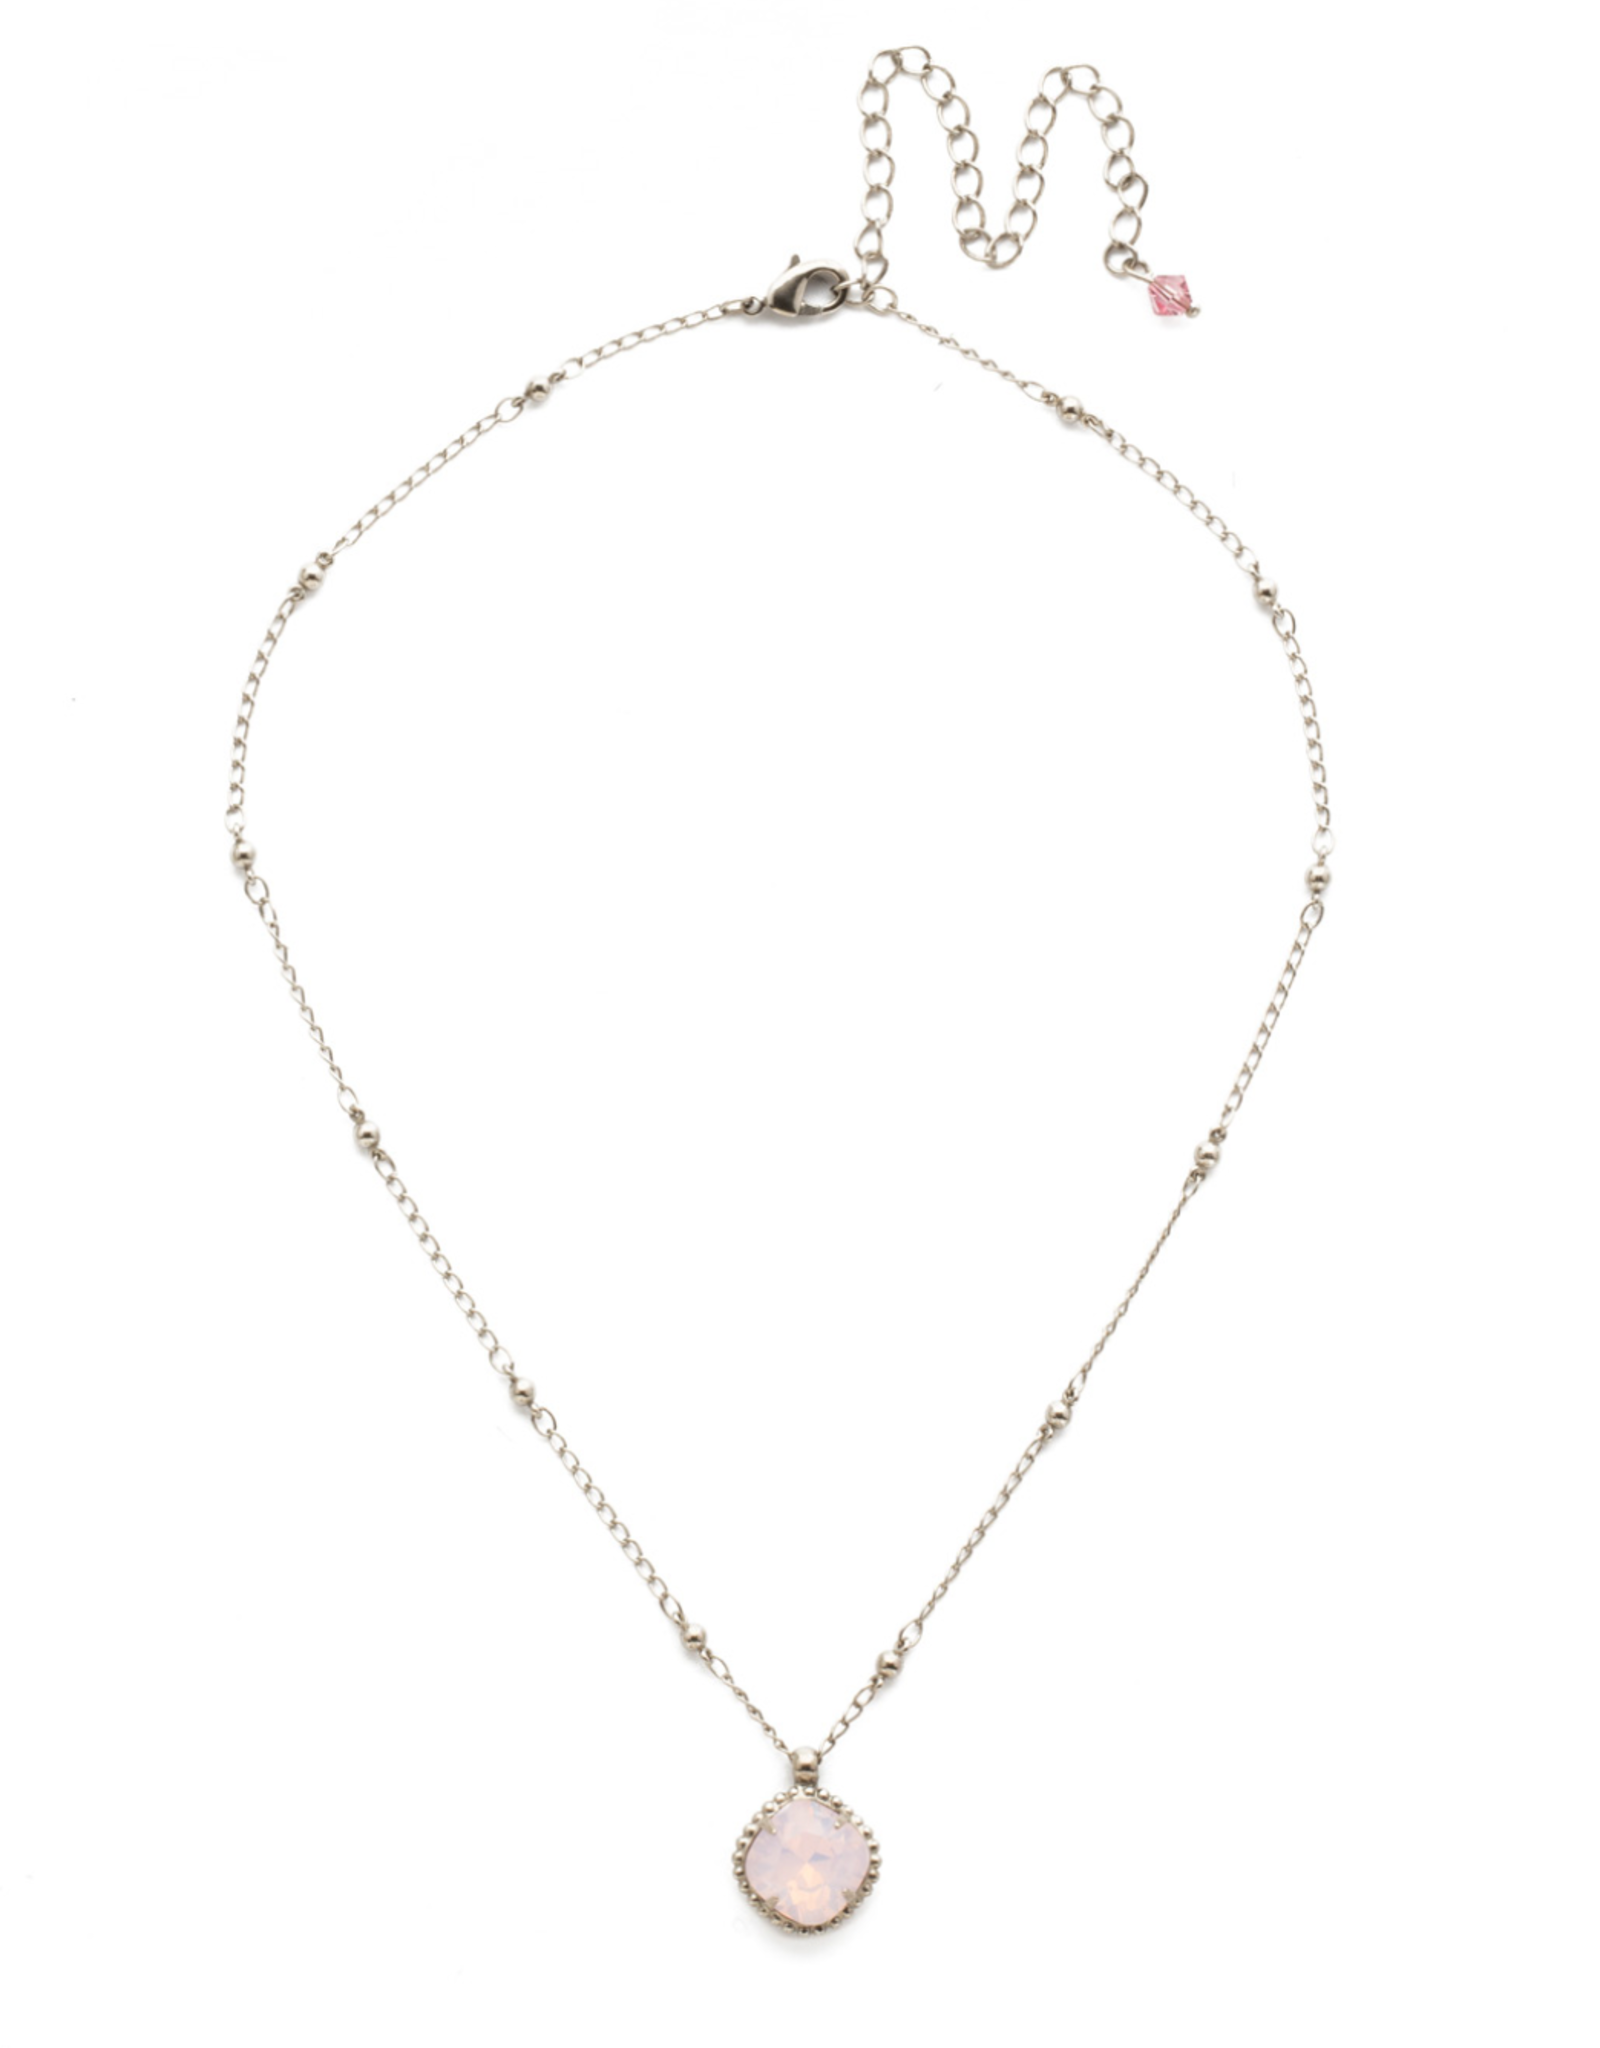 Cushion-Cut Solitaire Necklace in Antique Silver